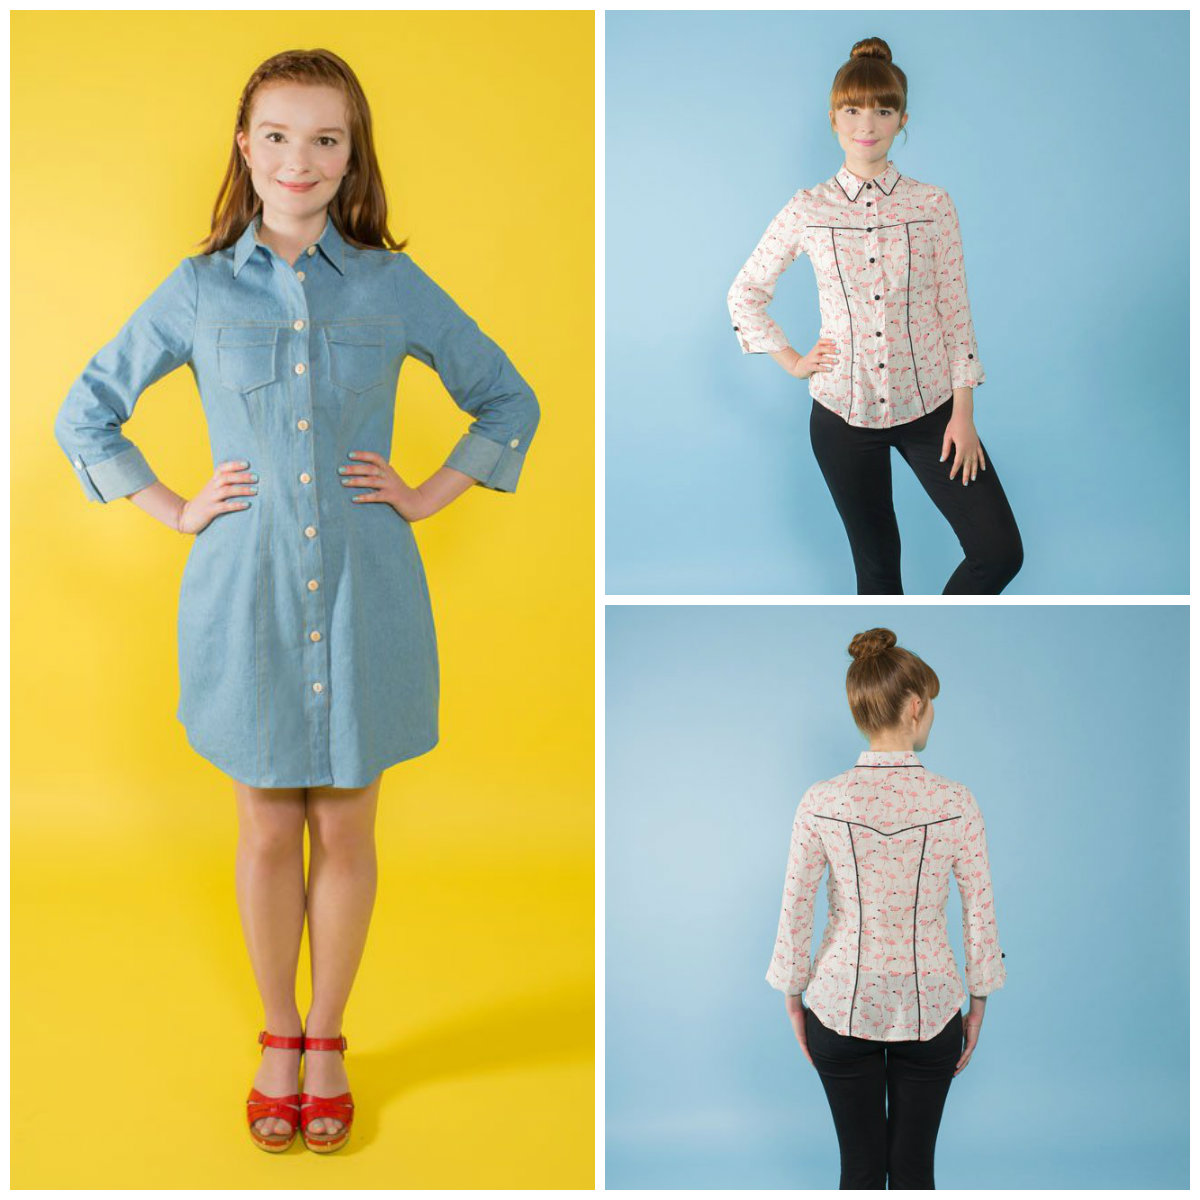 Tilly and the Buttons: How to Use Digital Sewing Patterns